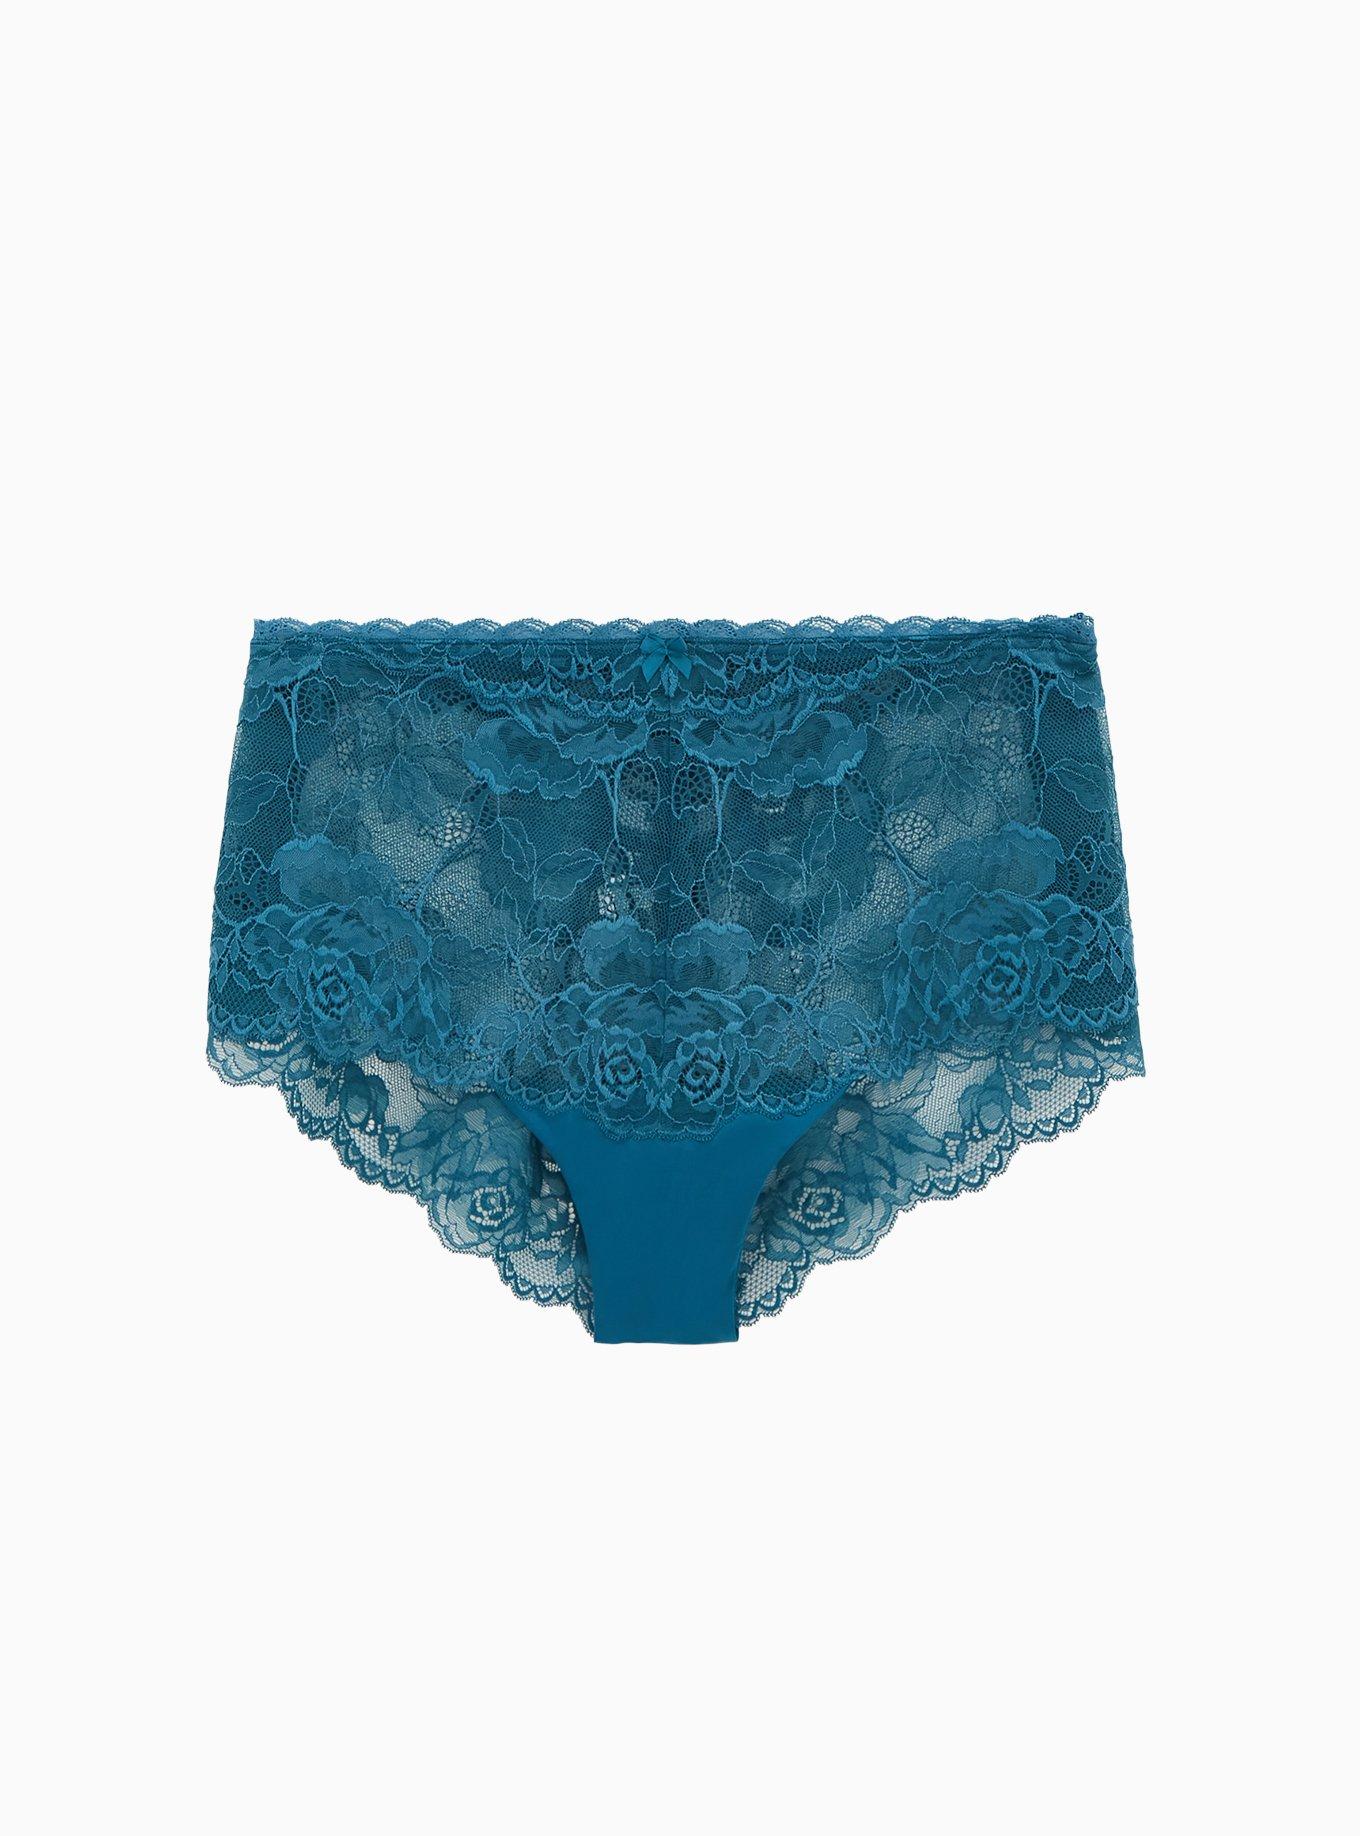 TORRID Floral Lace High-Rise Brief Panty